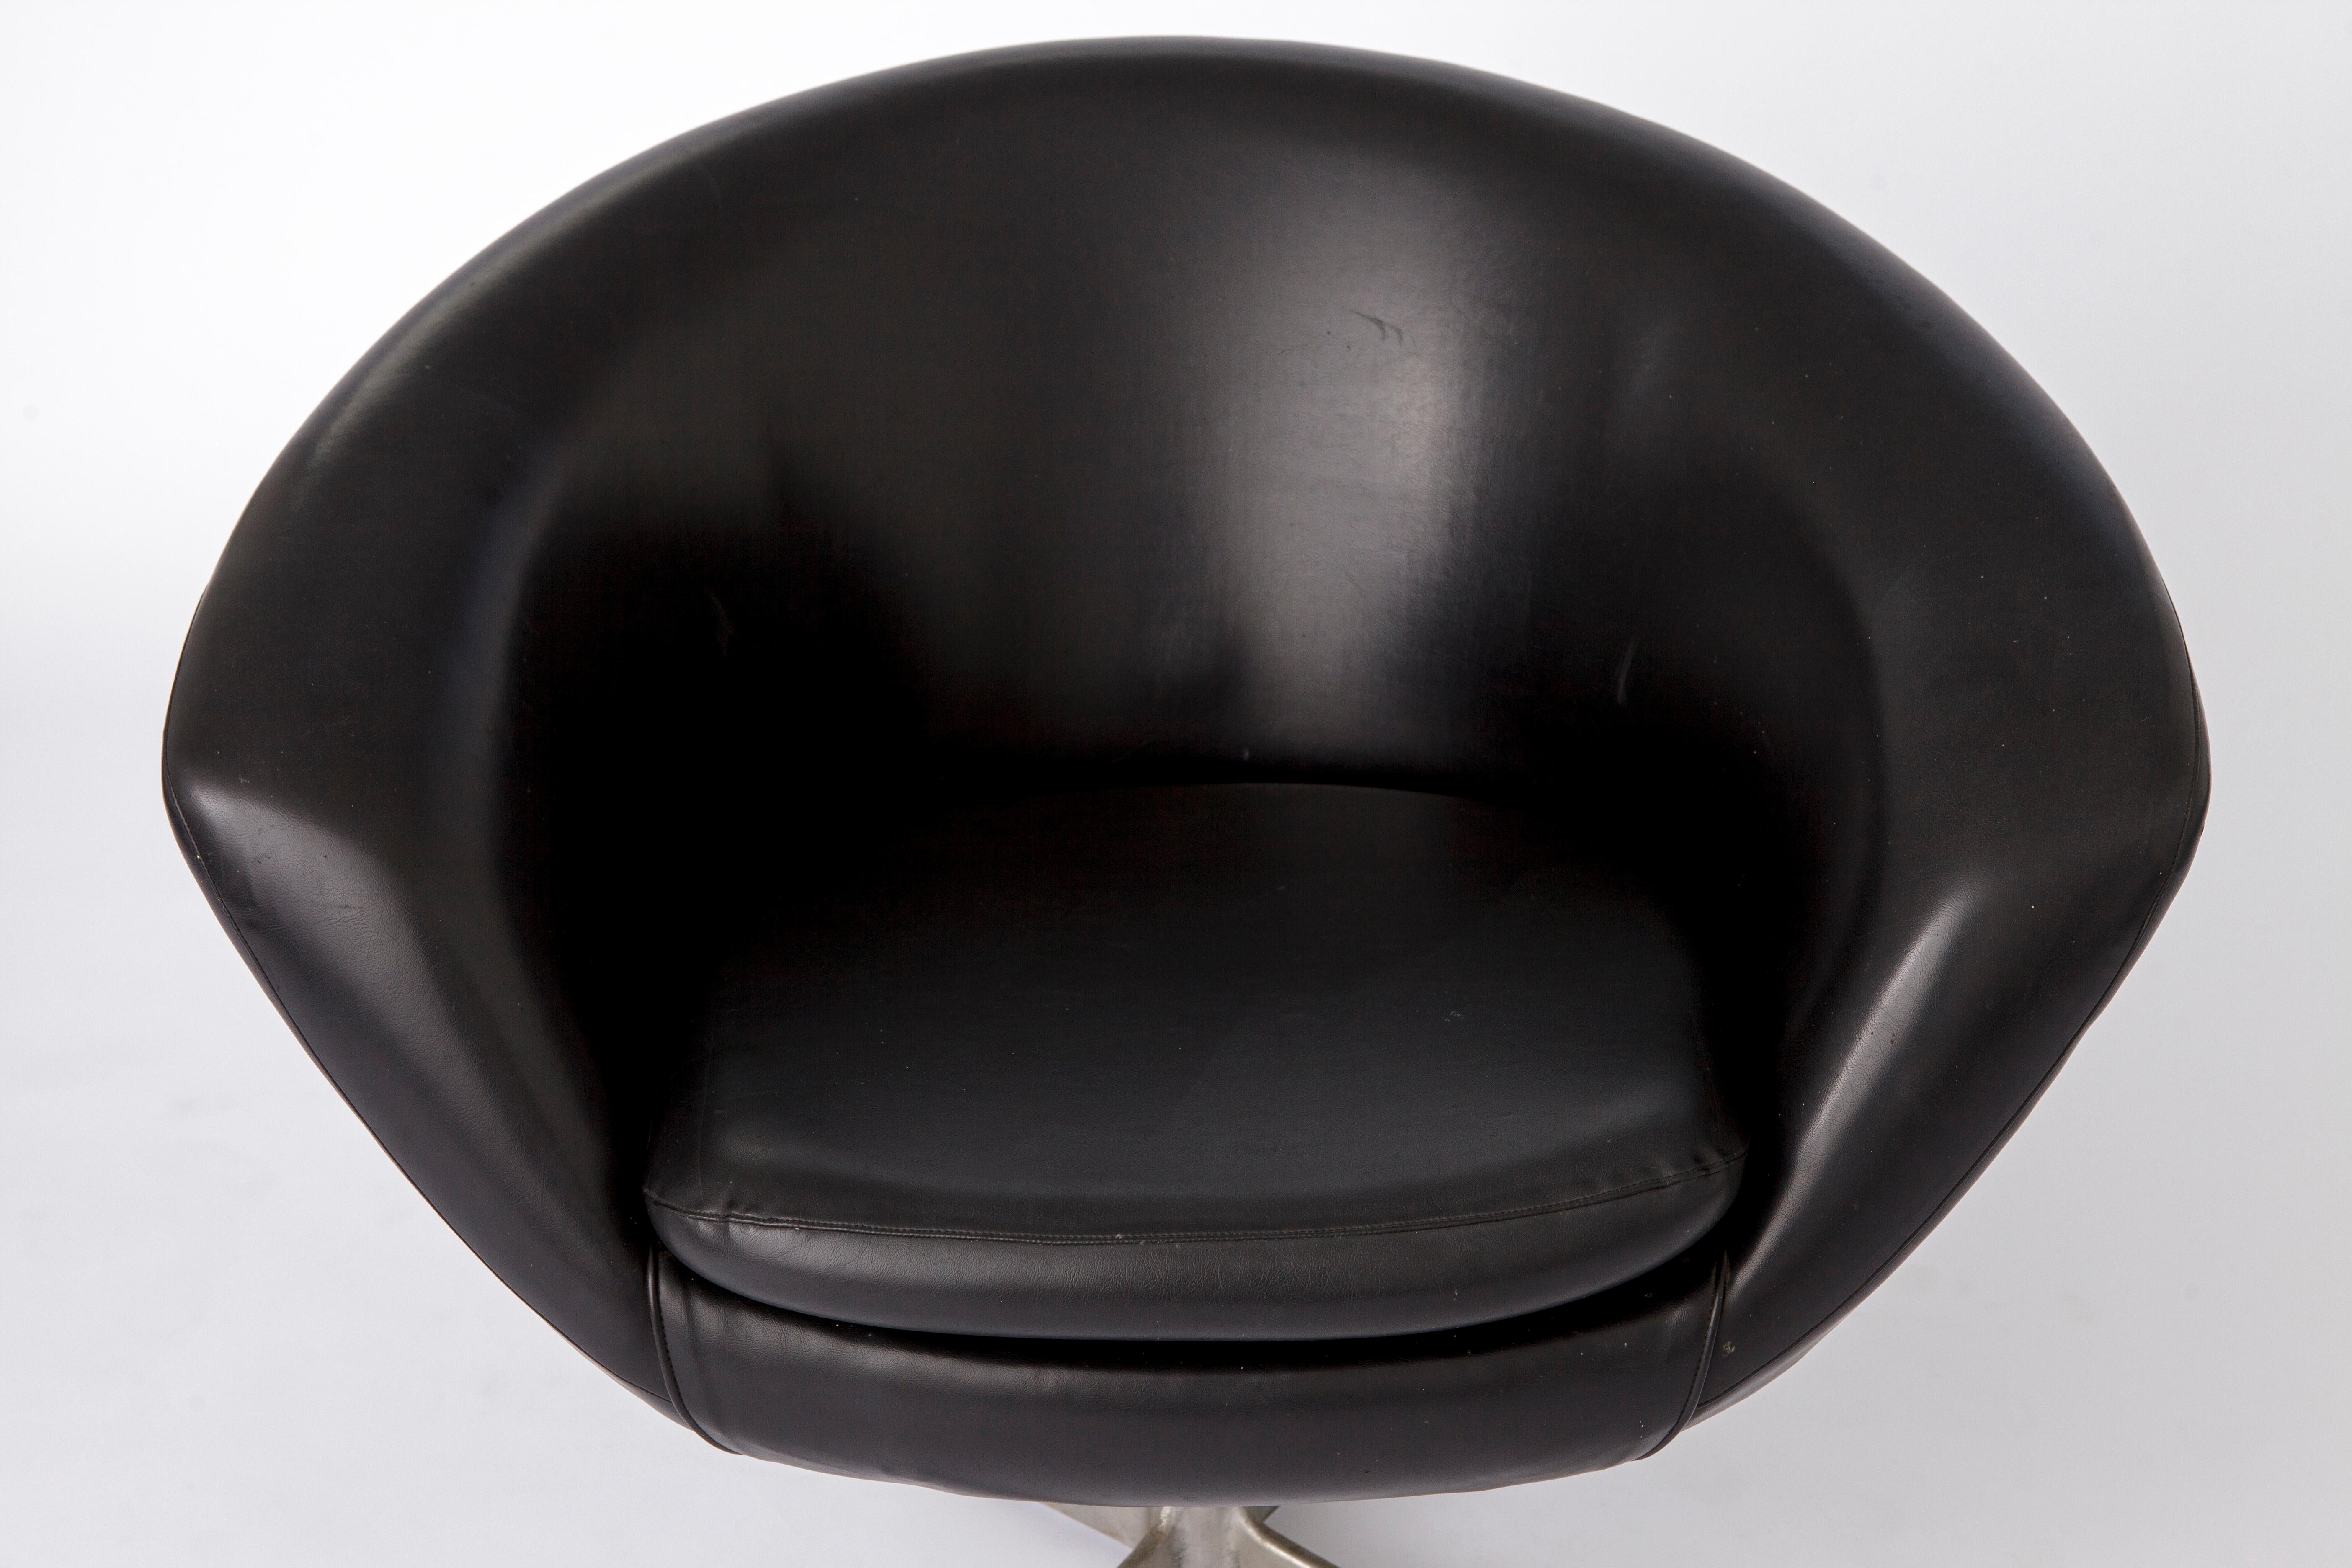 Vintage easy chair from the 1960s. 
Manufacturer: Overman, Sweden. 

Good vintage condition. Ultra light weight, total weight is under 10 kg. 
Black artificial leather (skai) material in good condition without defects. 